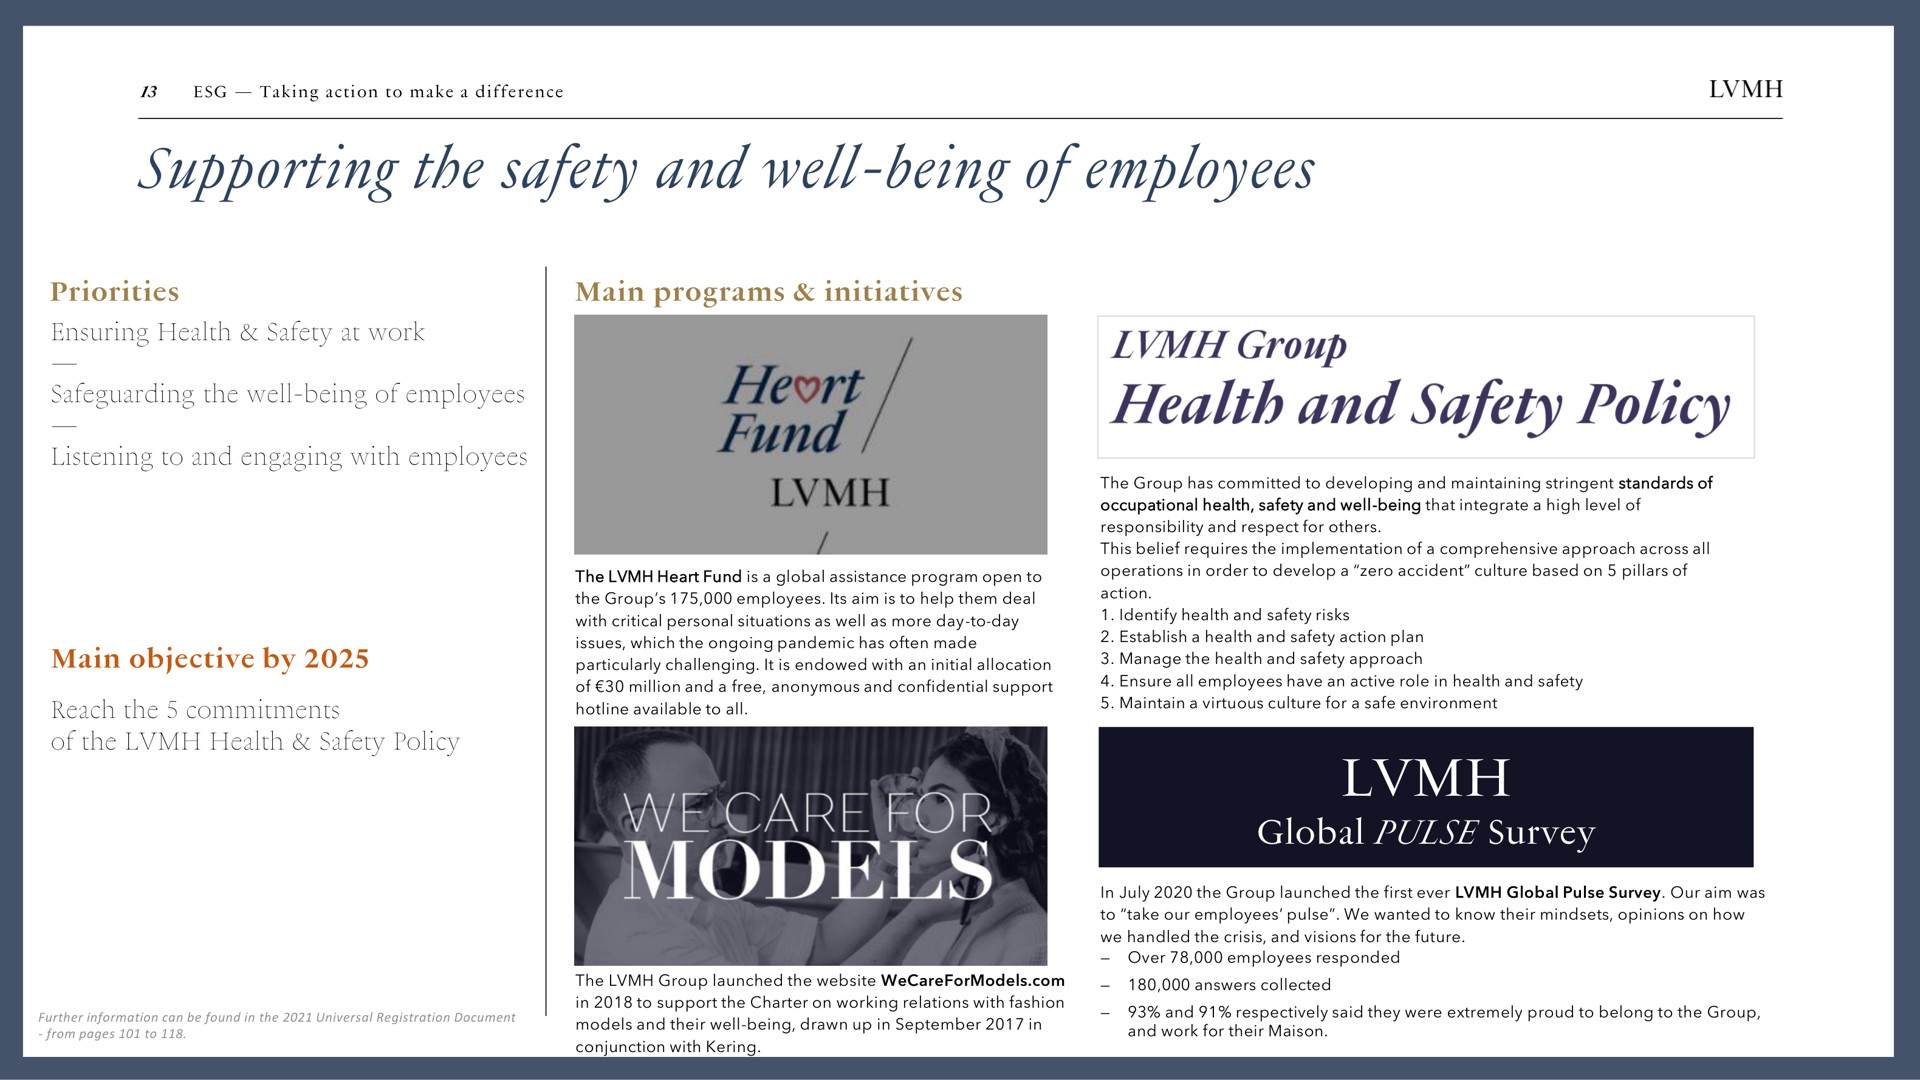 supporting the safety and well being of employees global pulse survey group health policy we models | LVMH